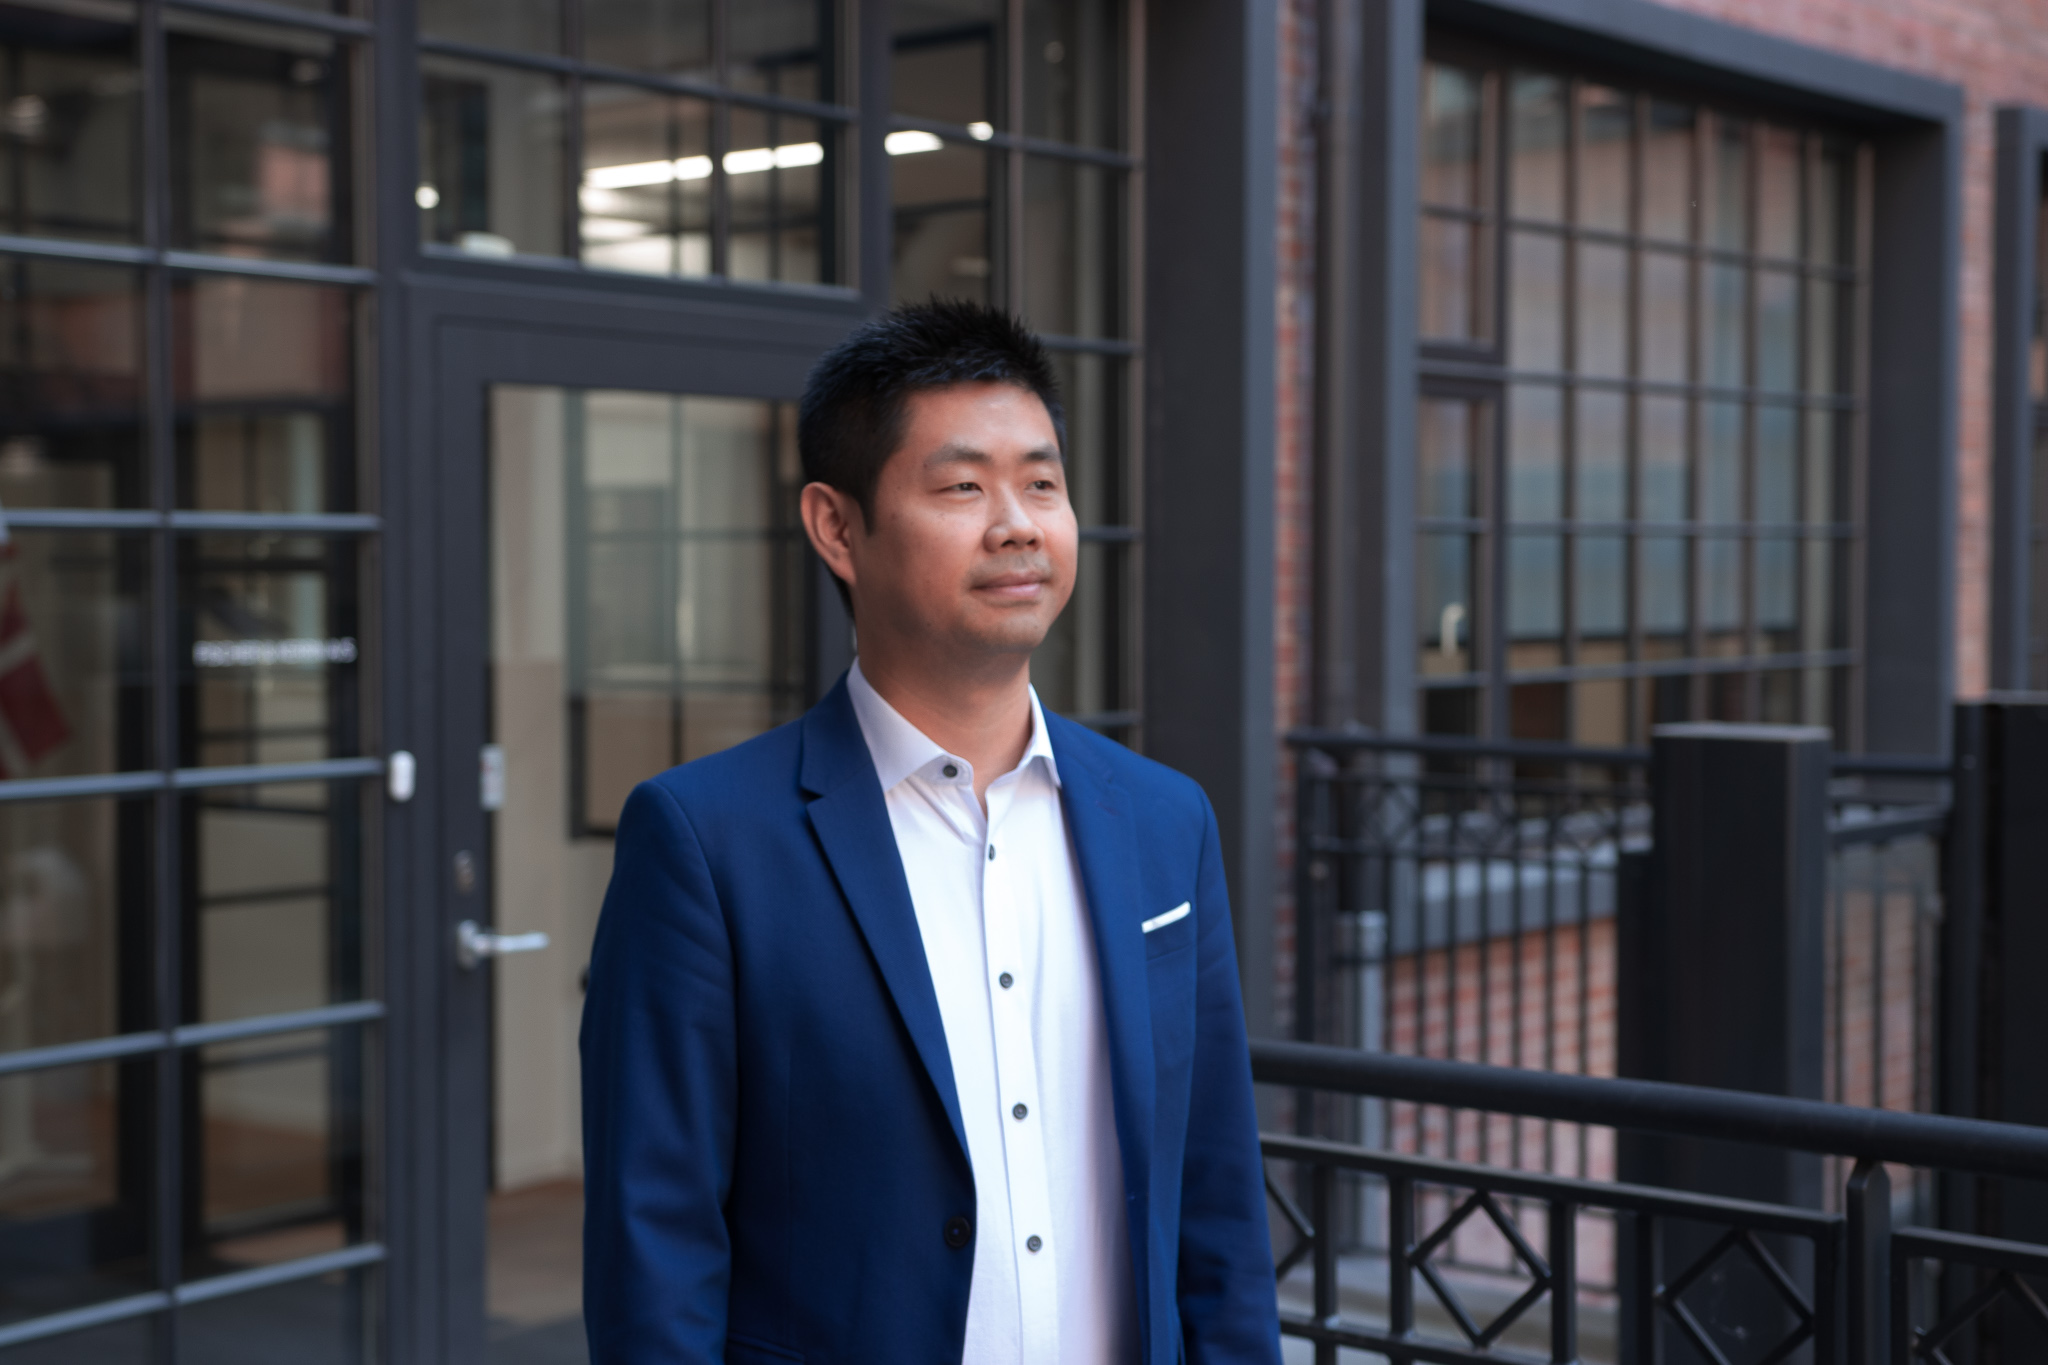 Youjie Zhang is Delivery Director within Monstarlab's Health & Life Science vertical